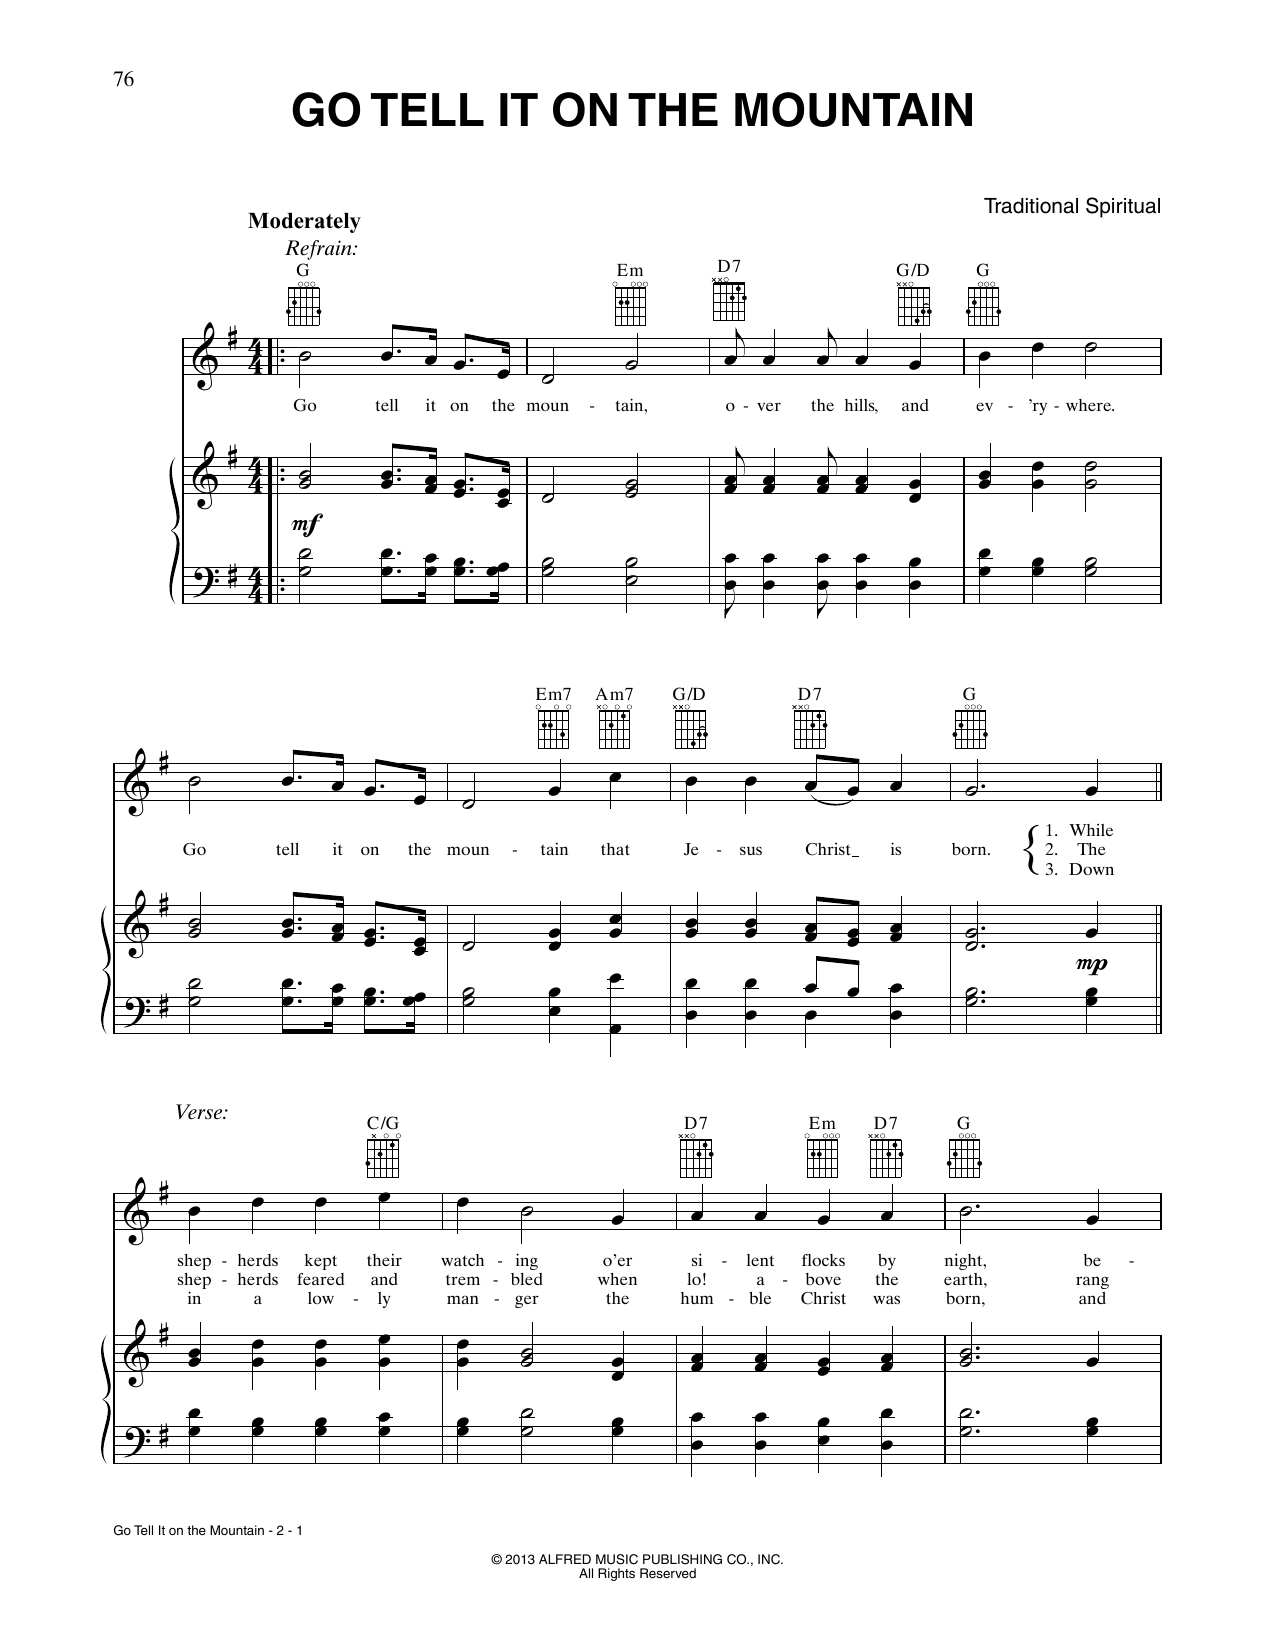 Download African-American Spiritual Go, Tell It On The Mountain Sheet Music